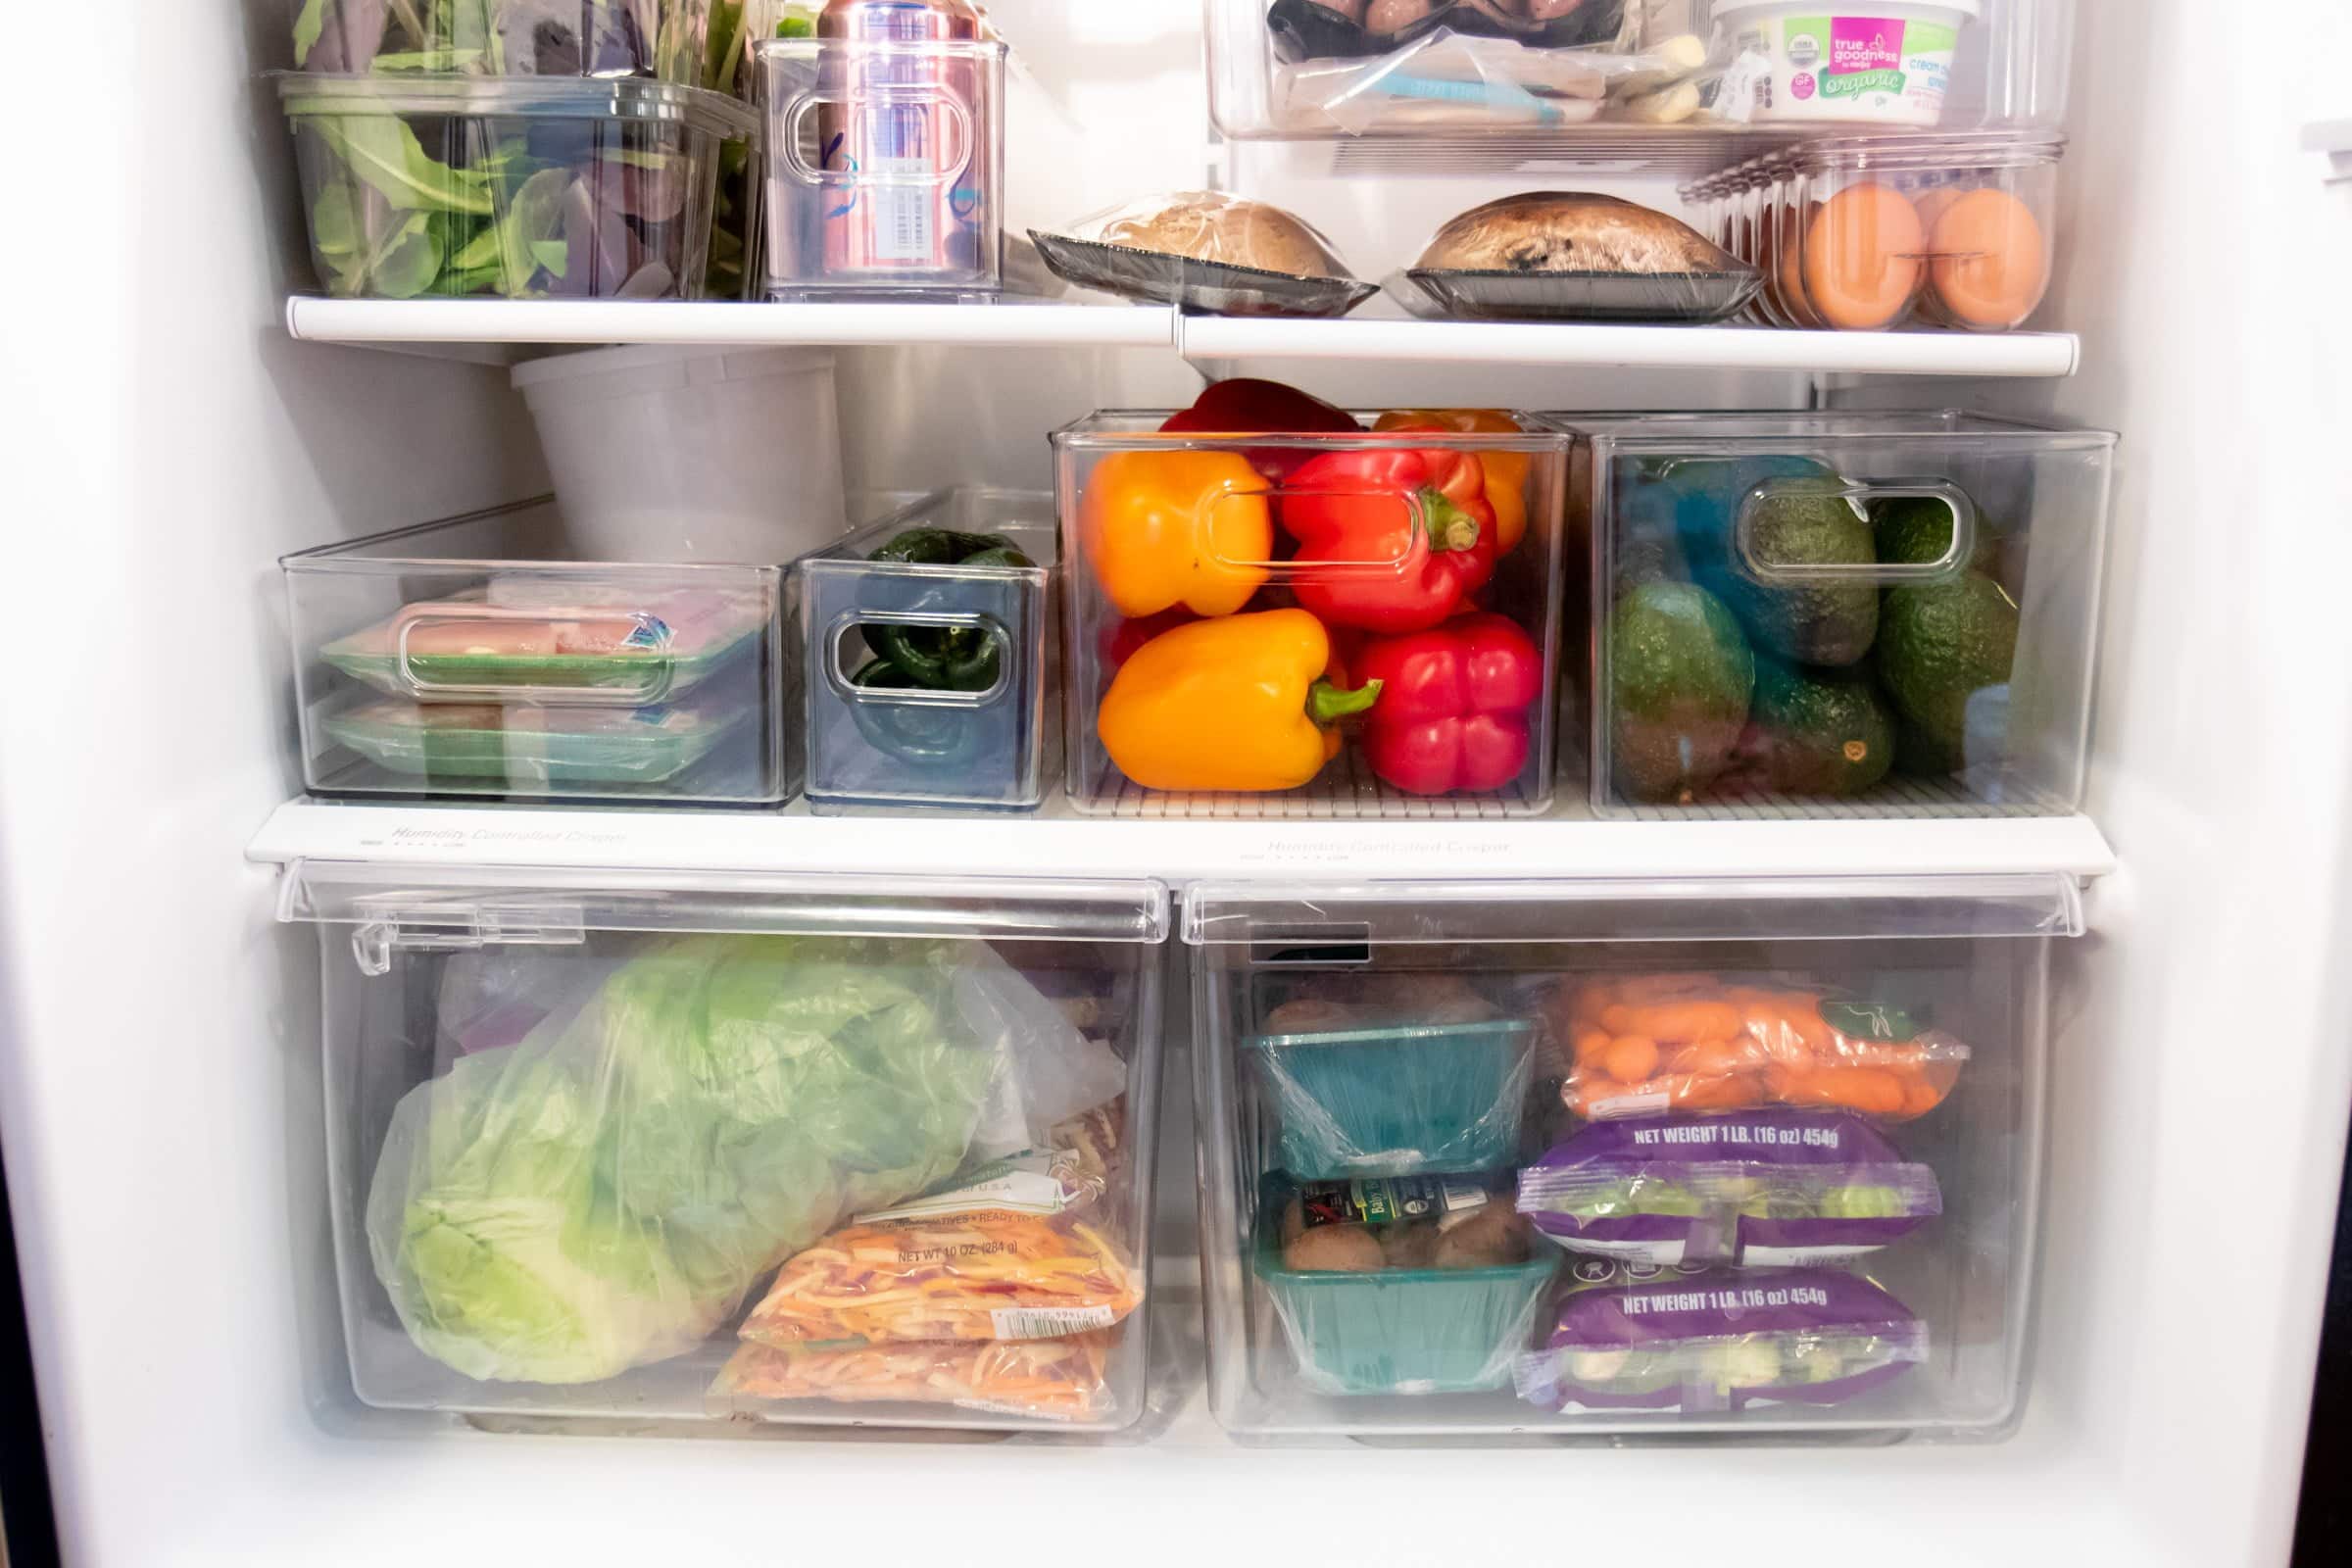 Close-up of crisper drawers filled with vegetables